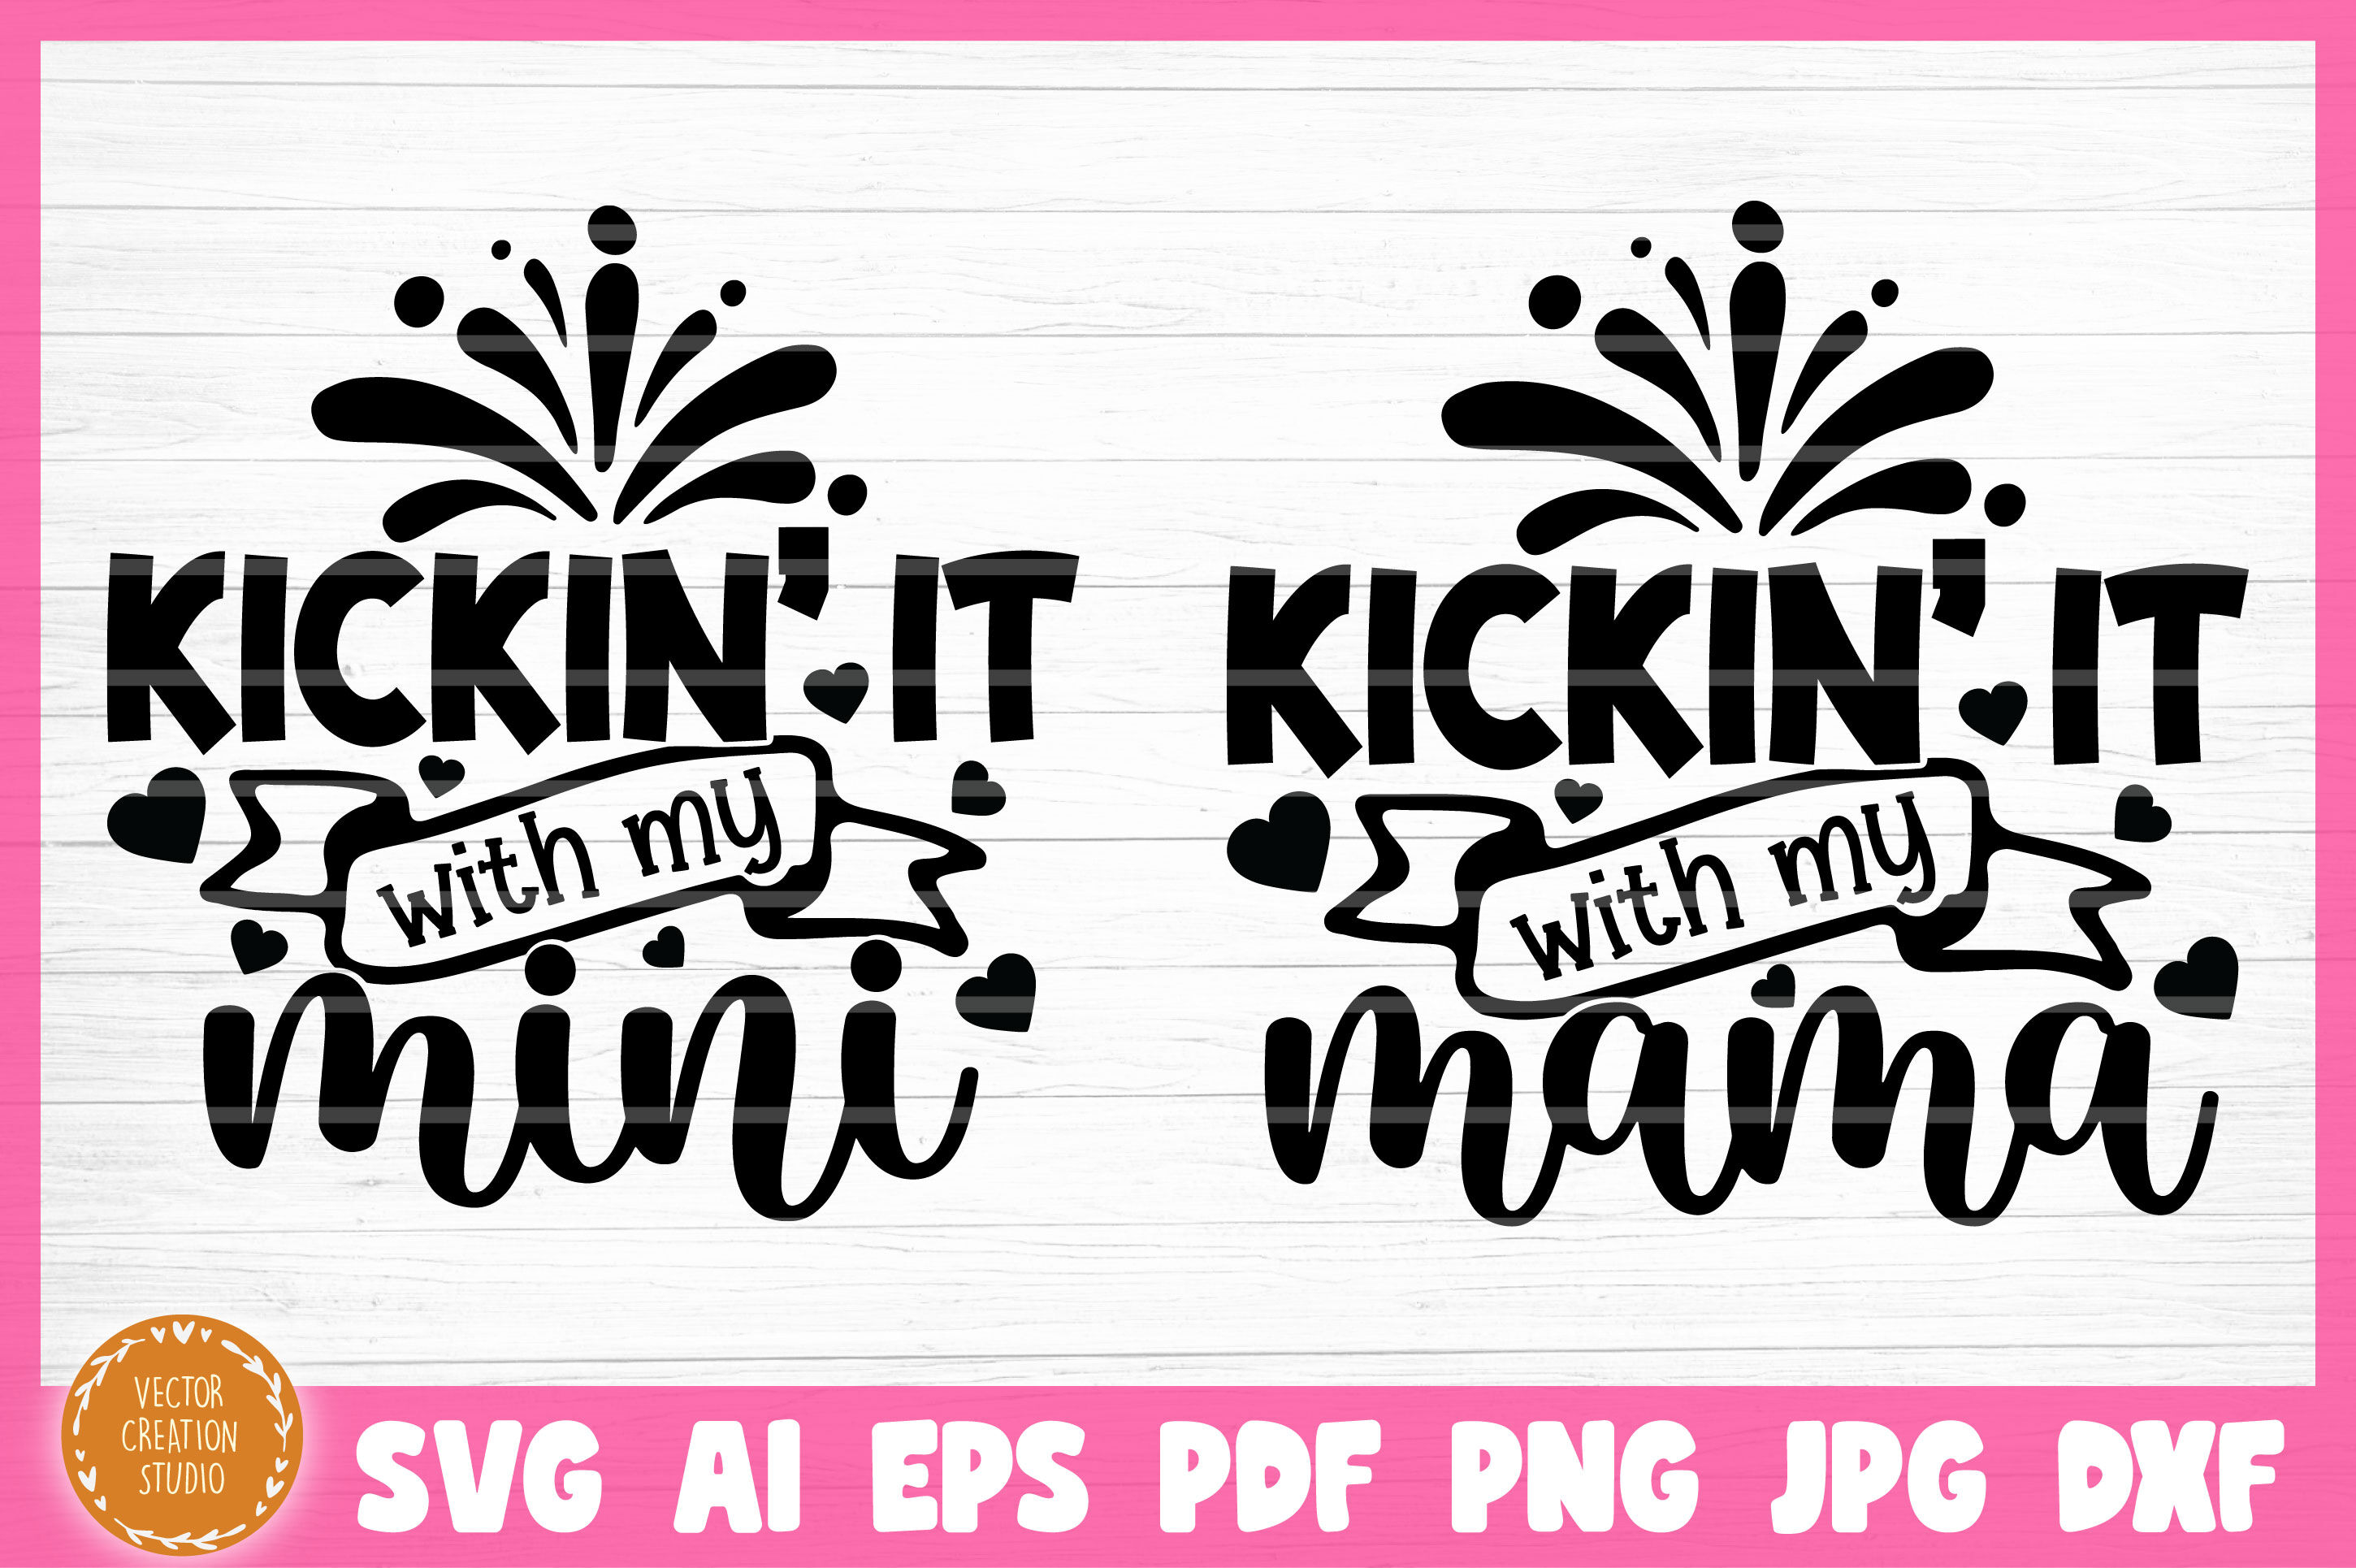 Download Kicking It With My Mini Kicking It With My Mama Mother Daughter Svg By Vectorcreationstudio Thehungryjpeg Com